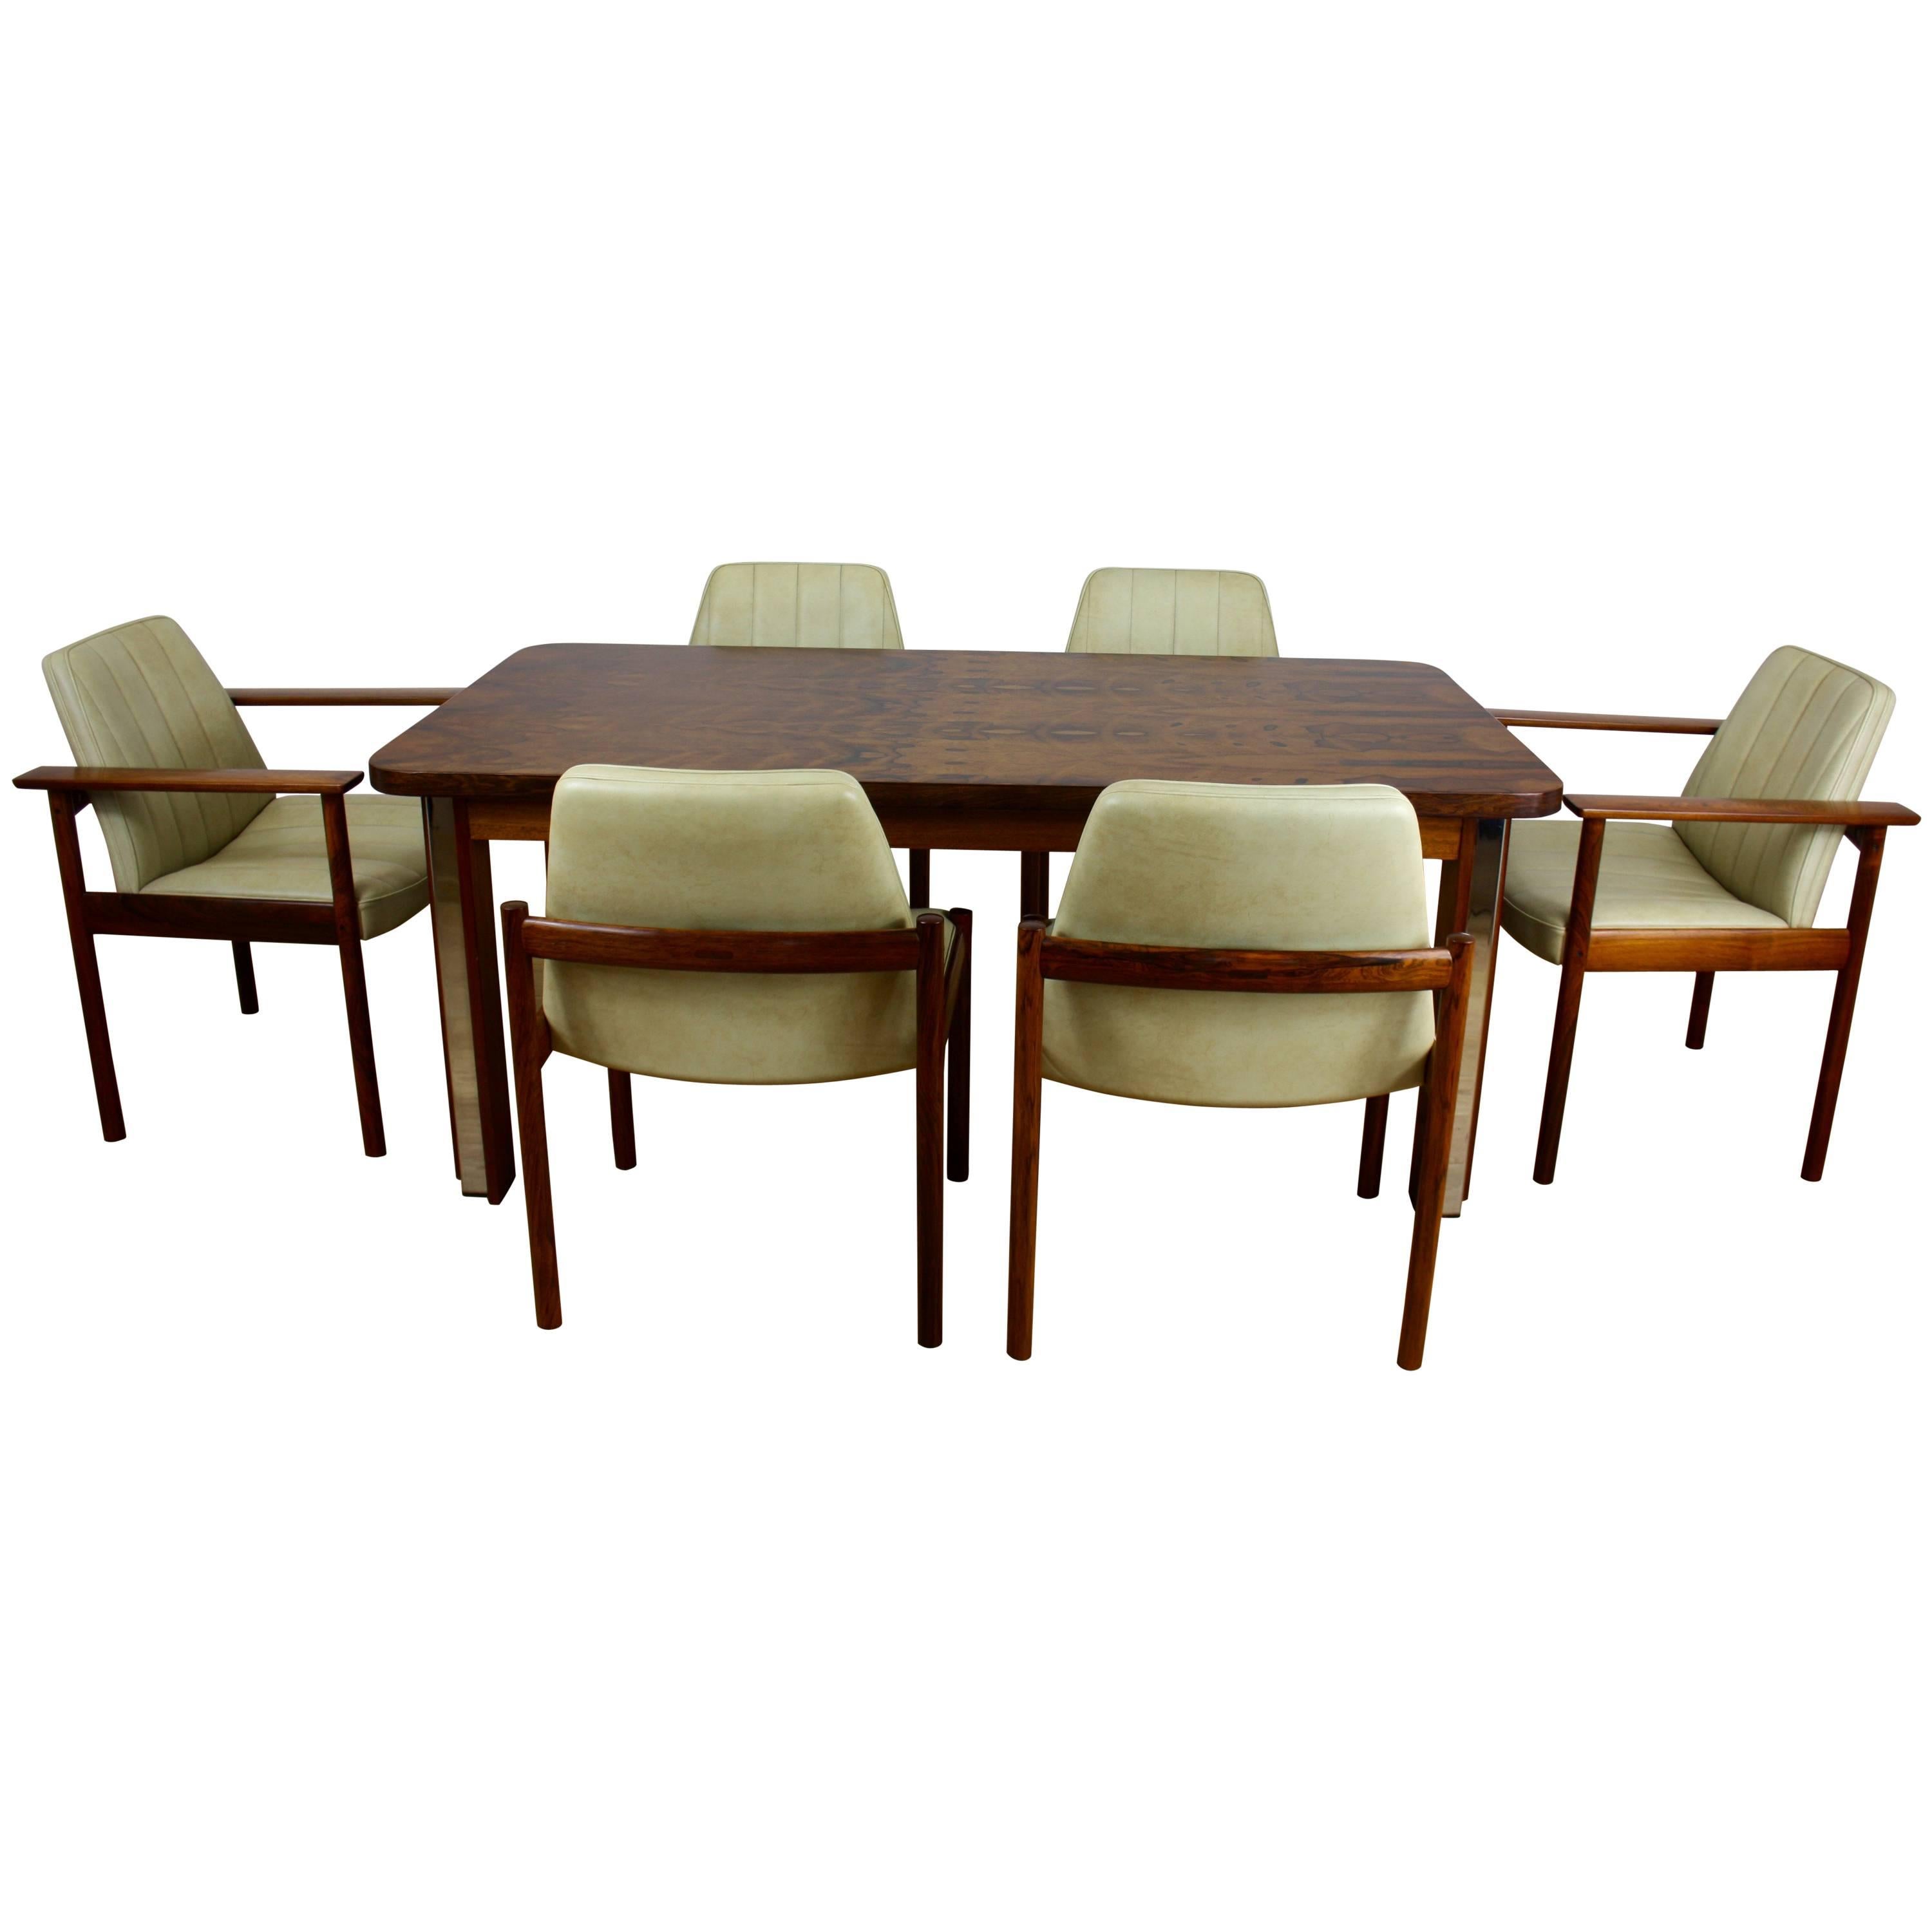 MID TWENTIETH CENTURY DESIGN ROSEWOOD DINING TABLE And CHAIRS